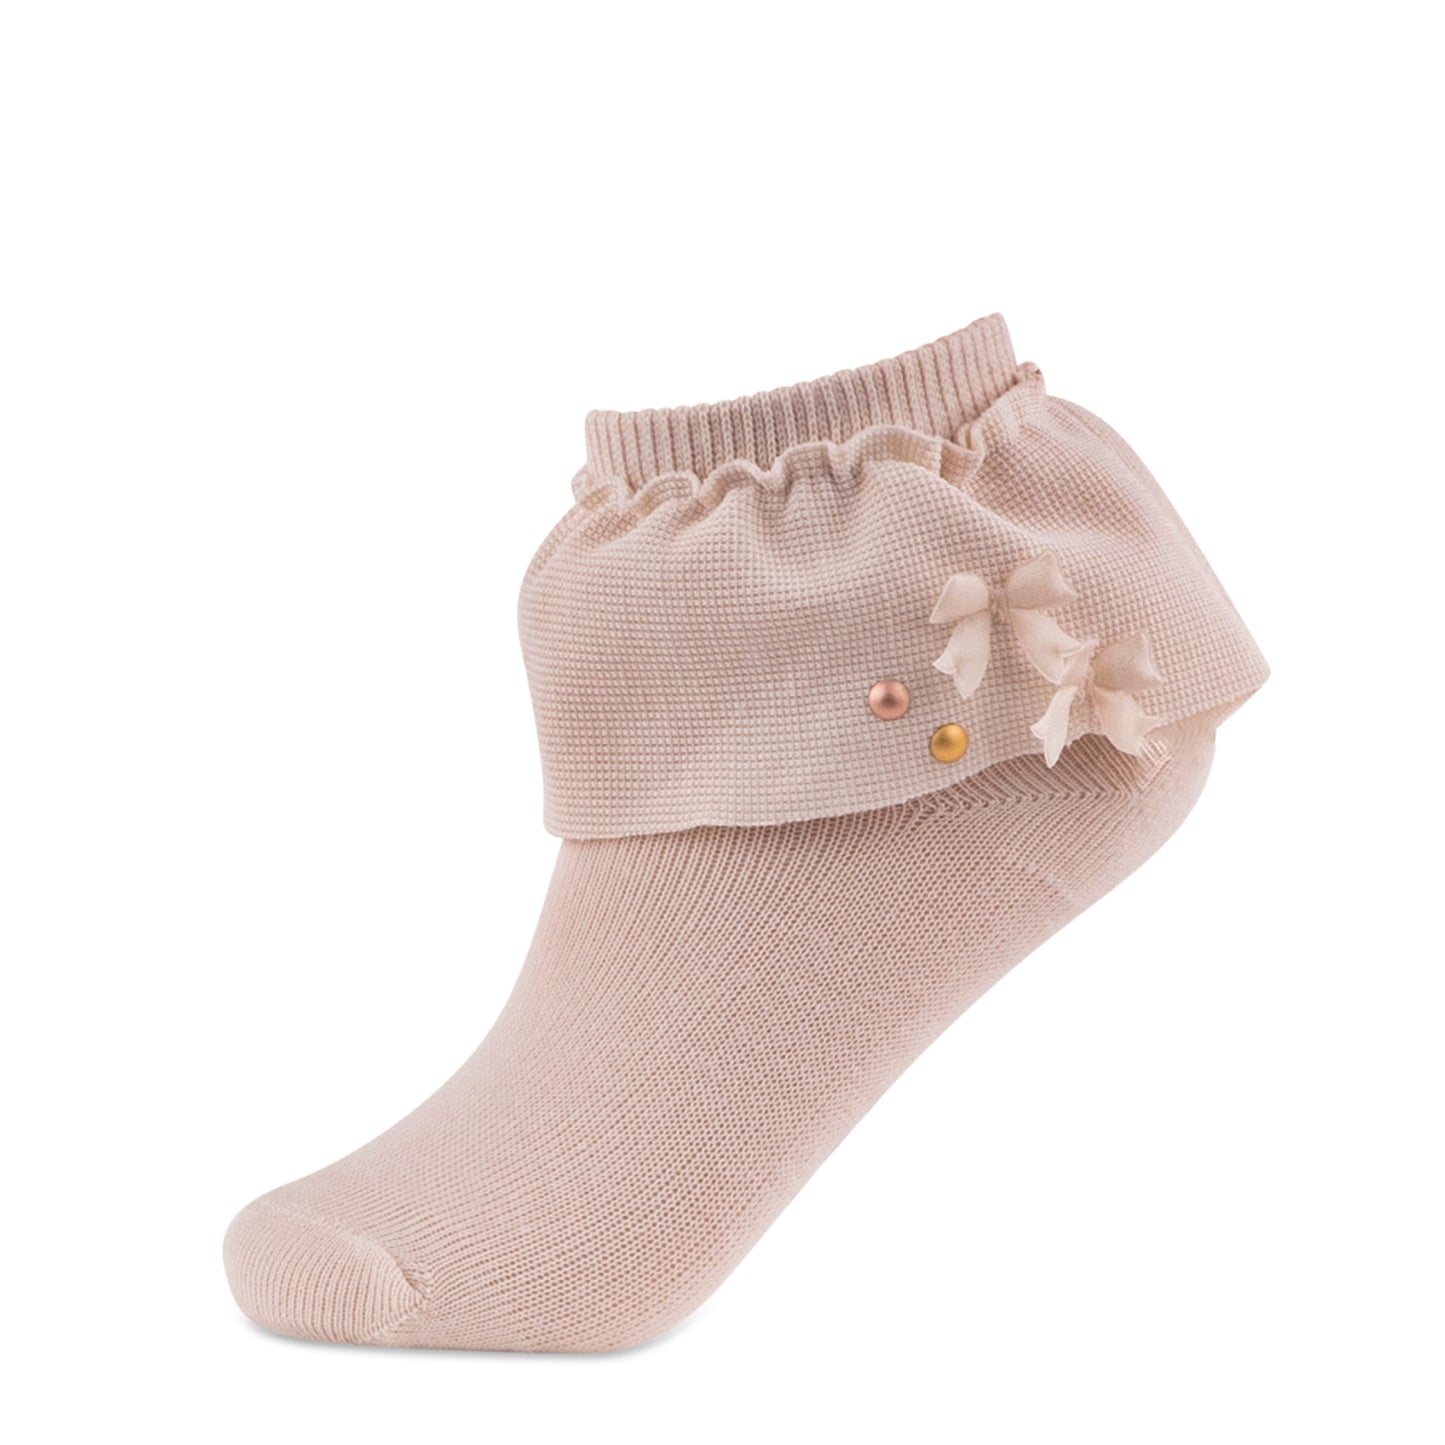 jrp socks blush dreamy lace anklet sock with bows